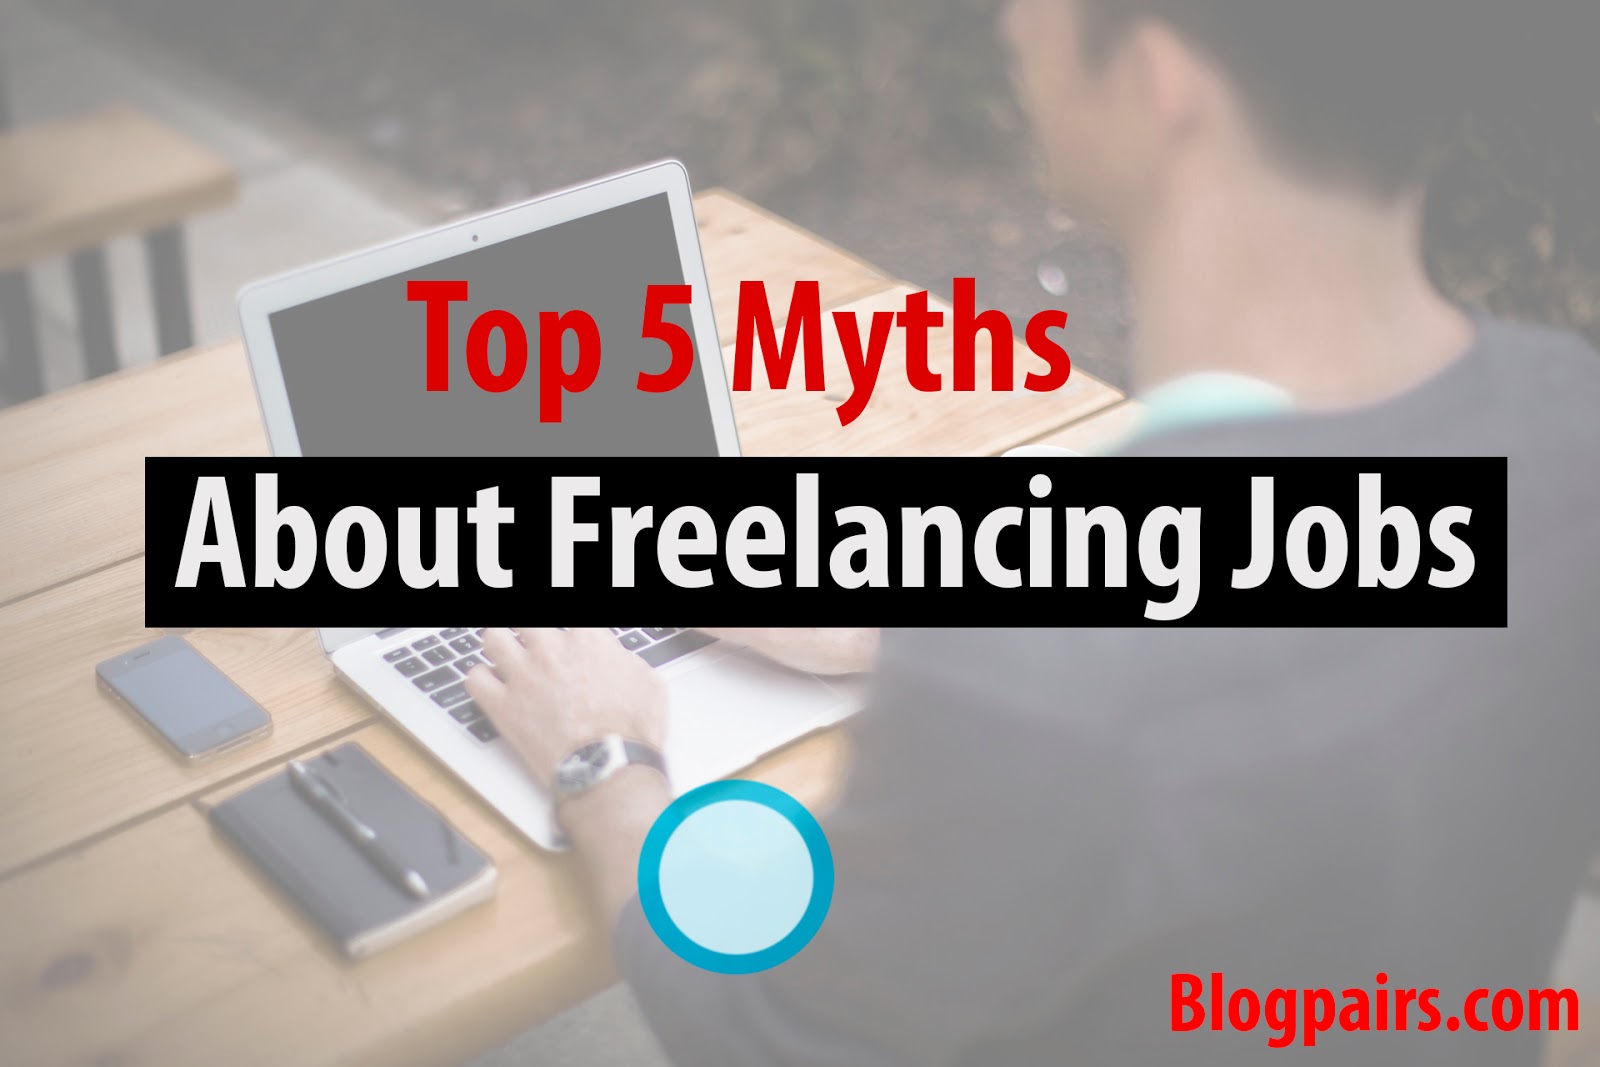 Top 5 Myths about freelancing jobs